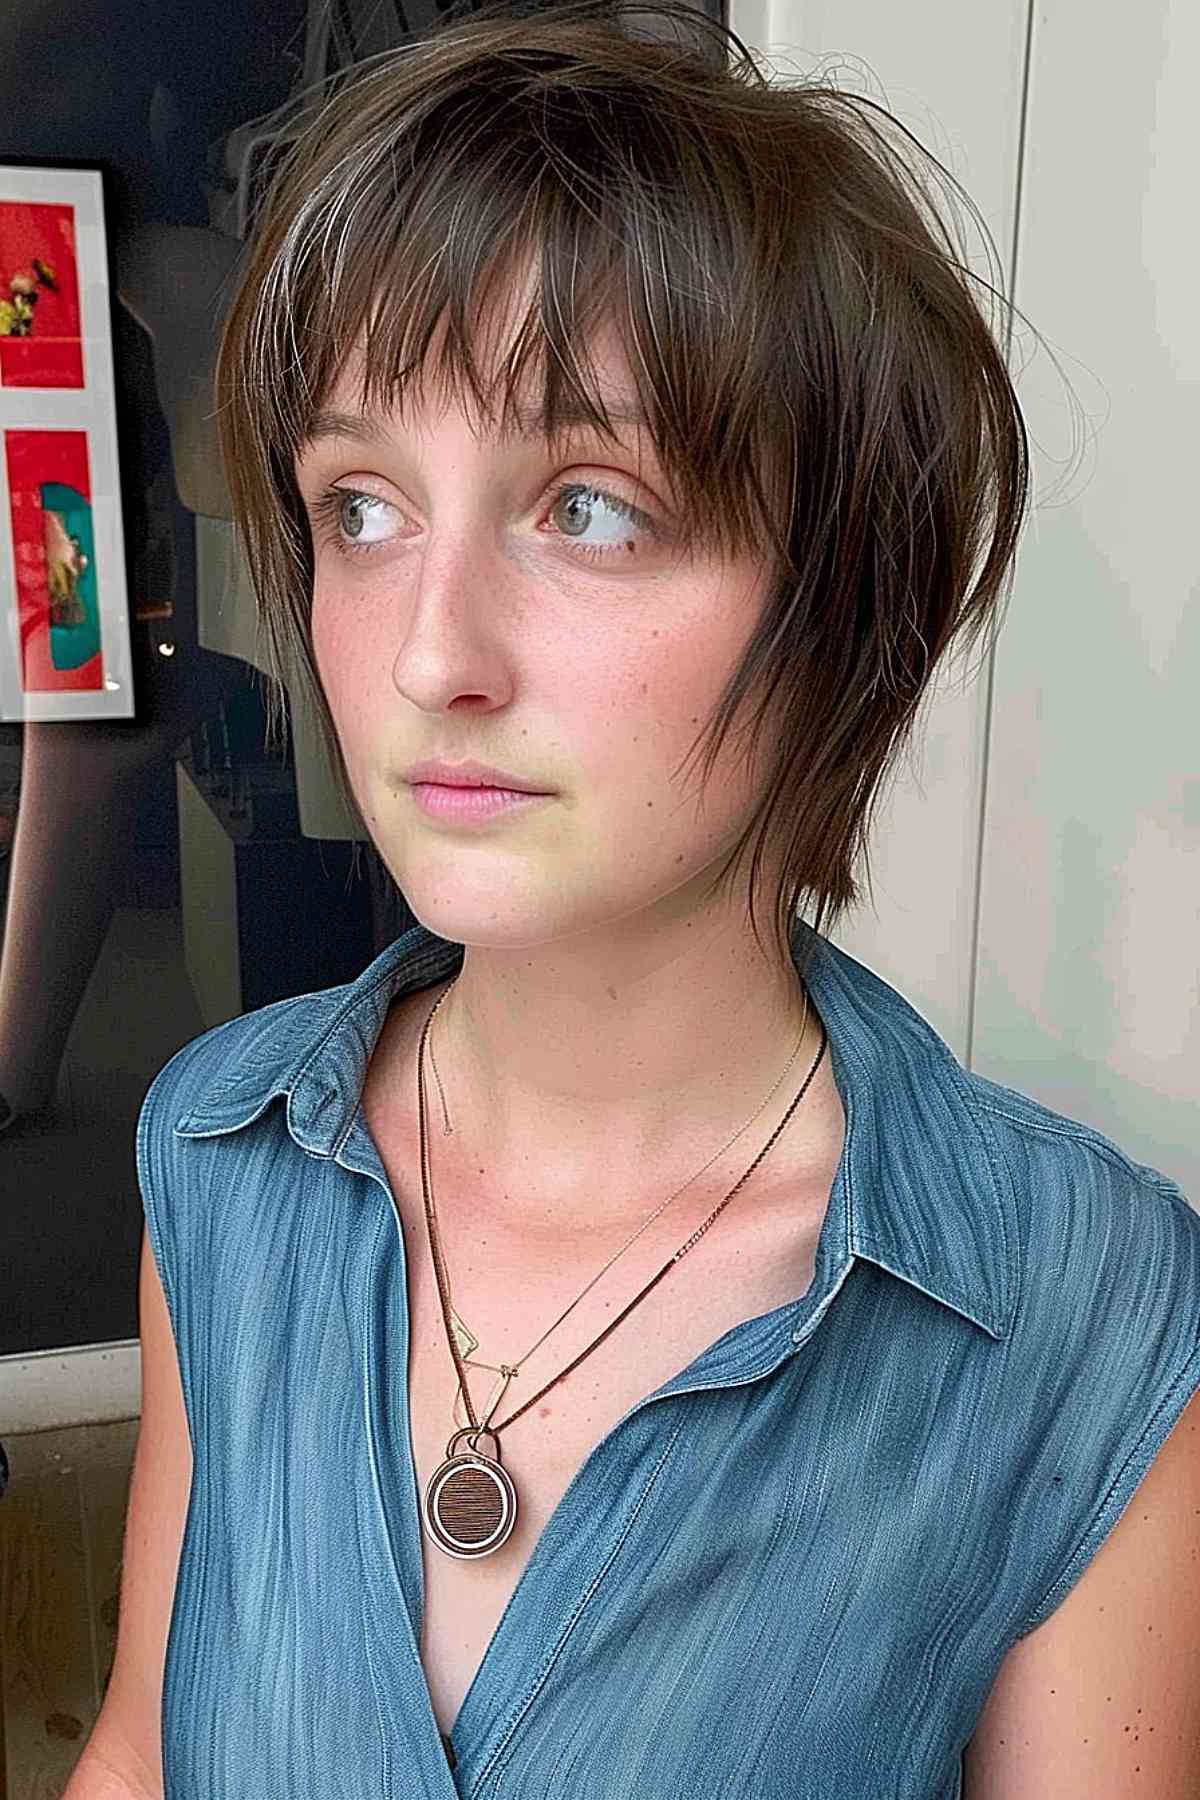 Young woman sporting a pixie Wolf Cut on straight hair, looking off-camera with a thoughtful expression.